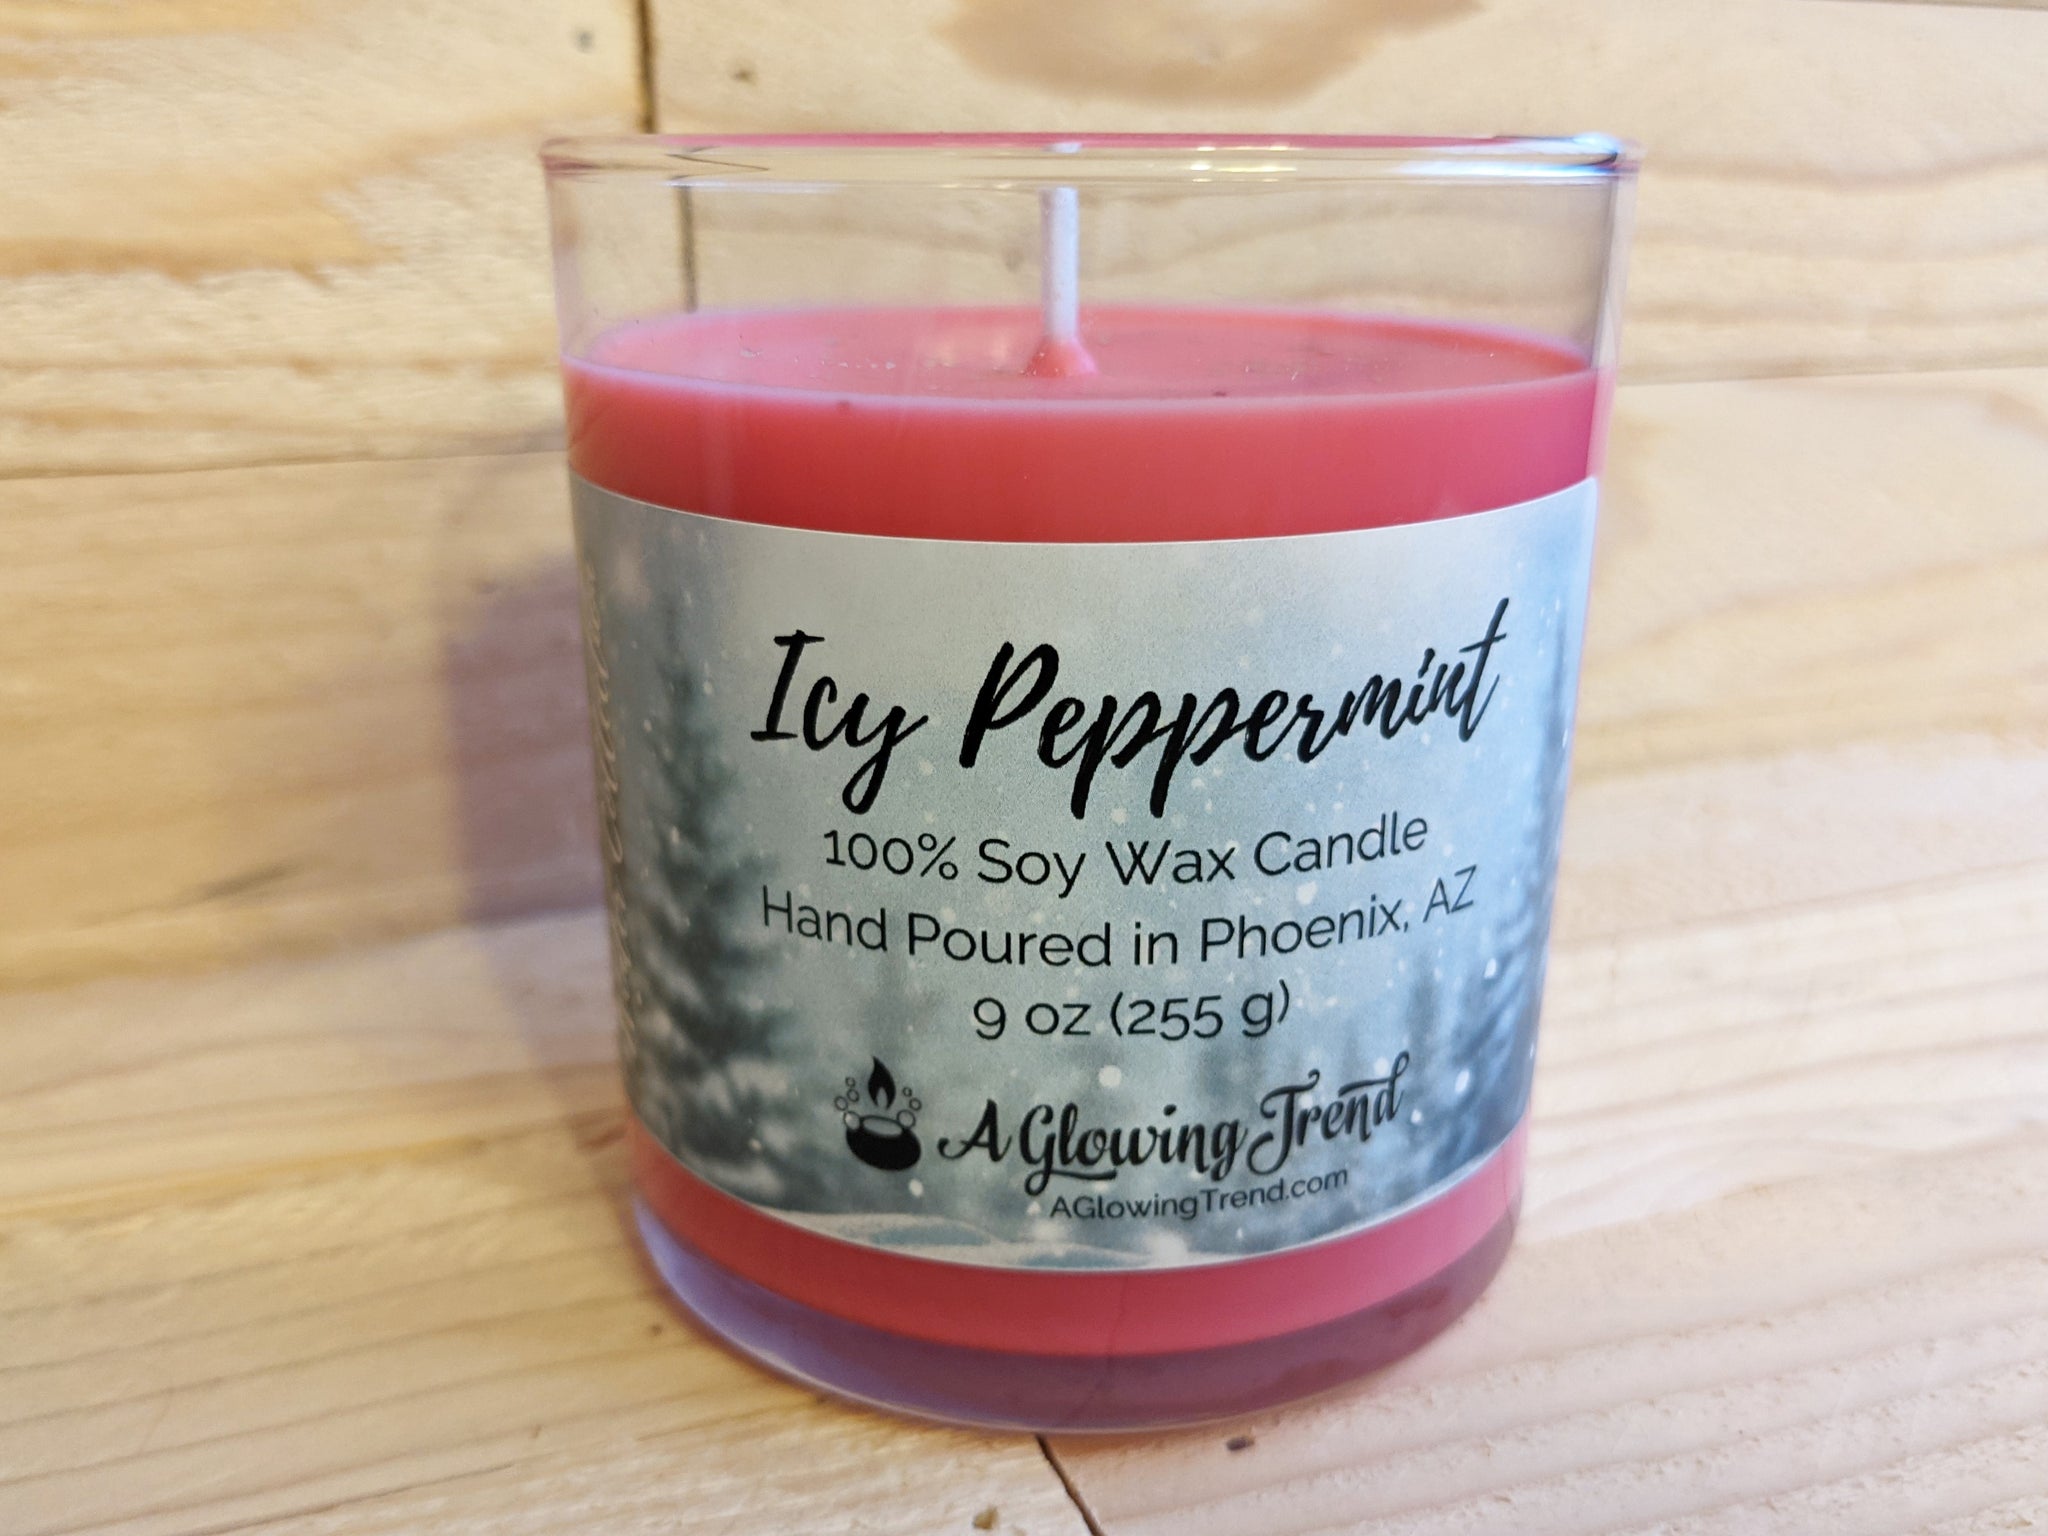 A 9 oz glass tumbler containing a red Icy Peppermint scented soy candle topped with glitter by A Glowing Trend.